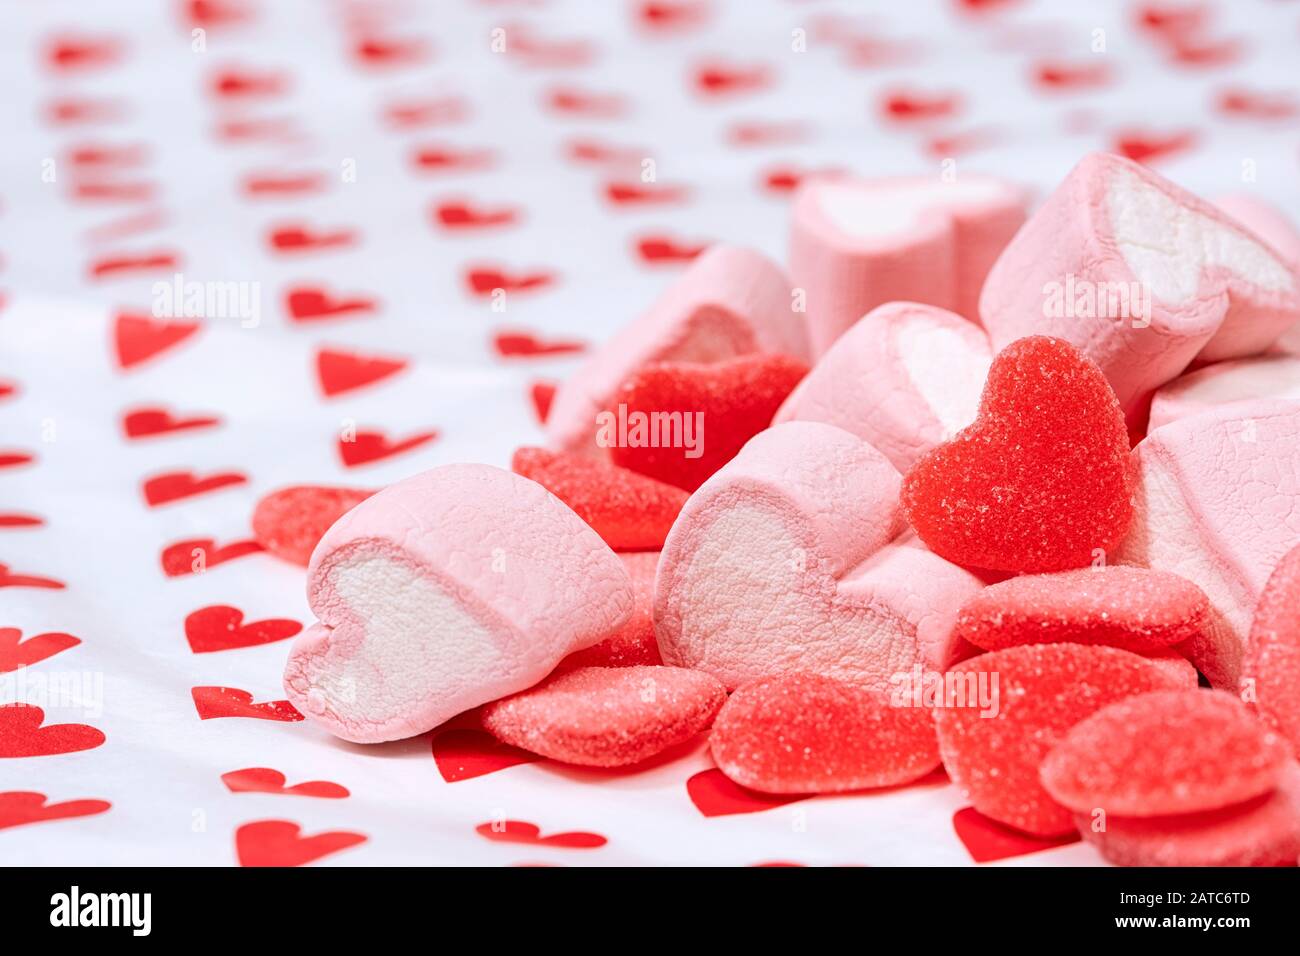 Close-up of Heart shaped candy sweets Stock Photo